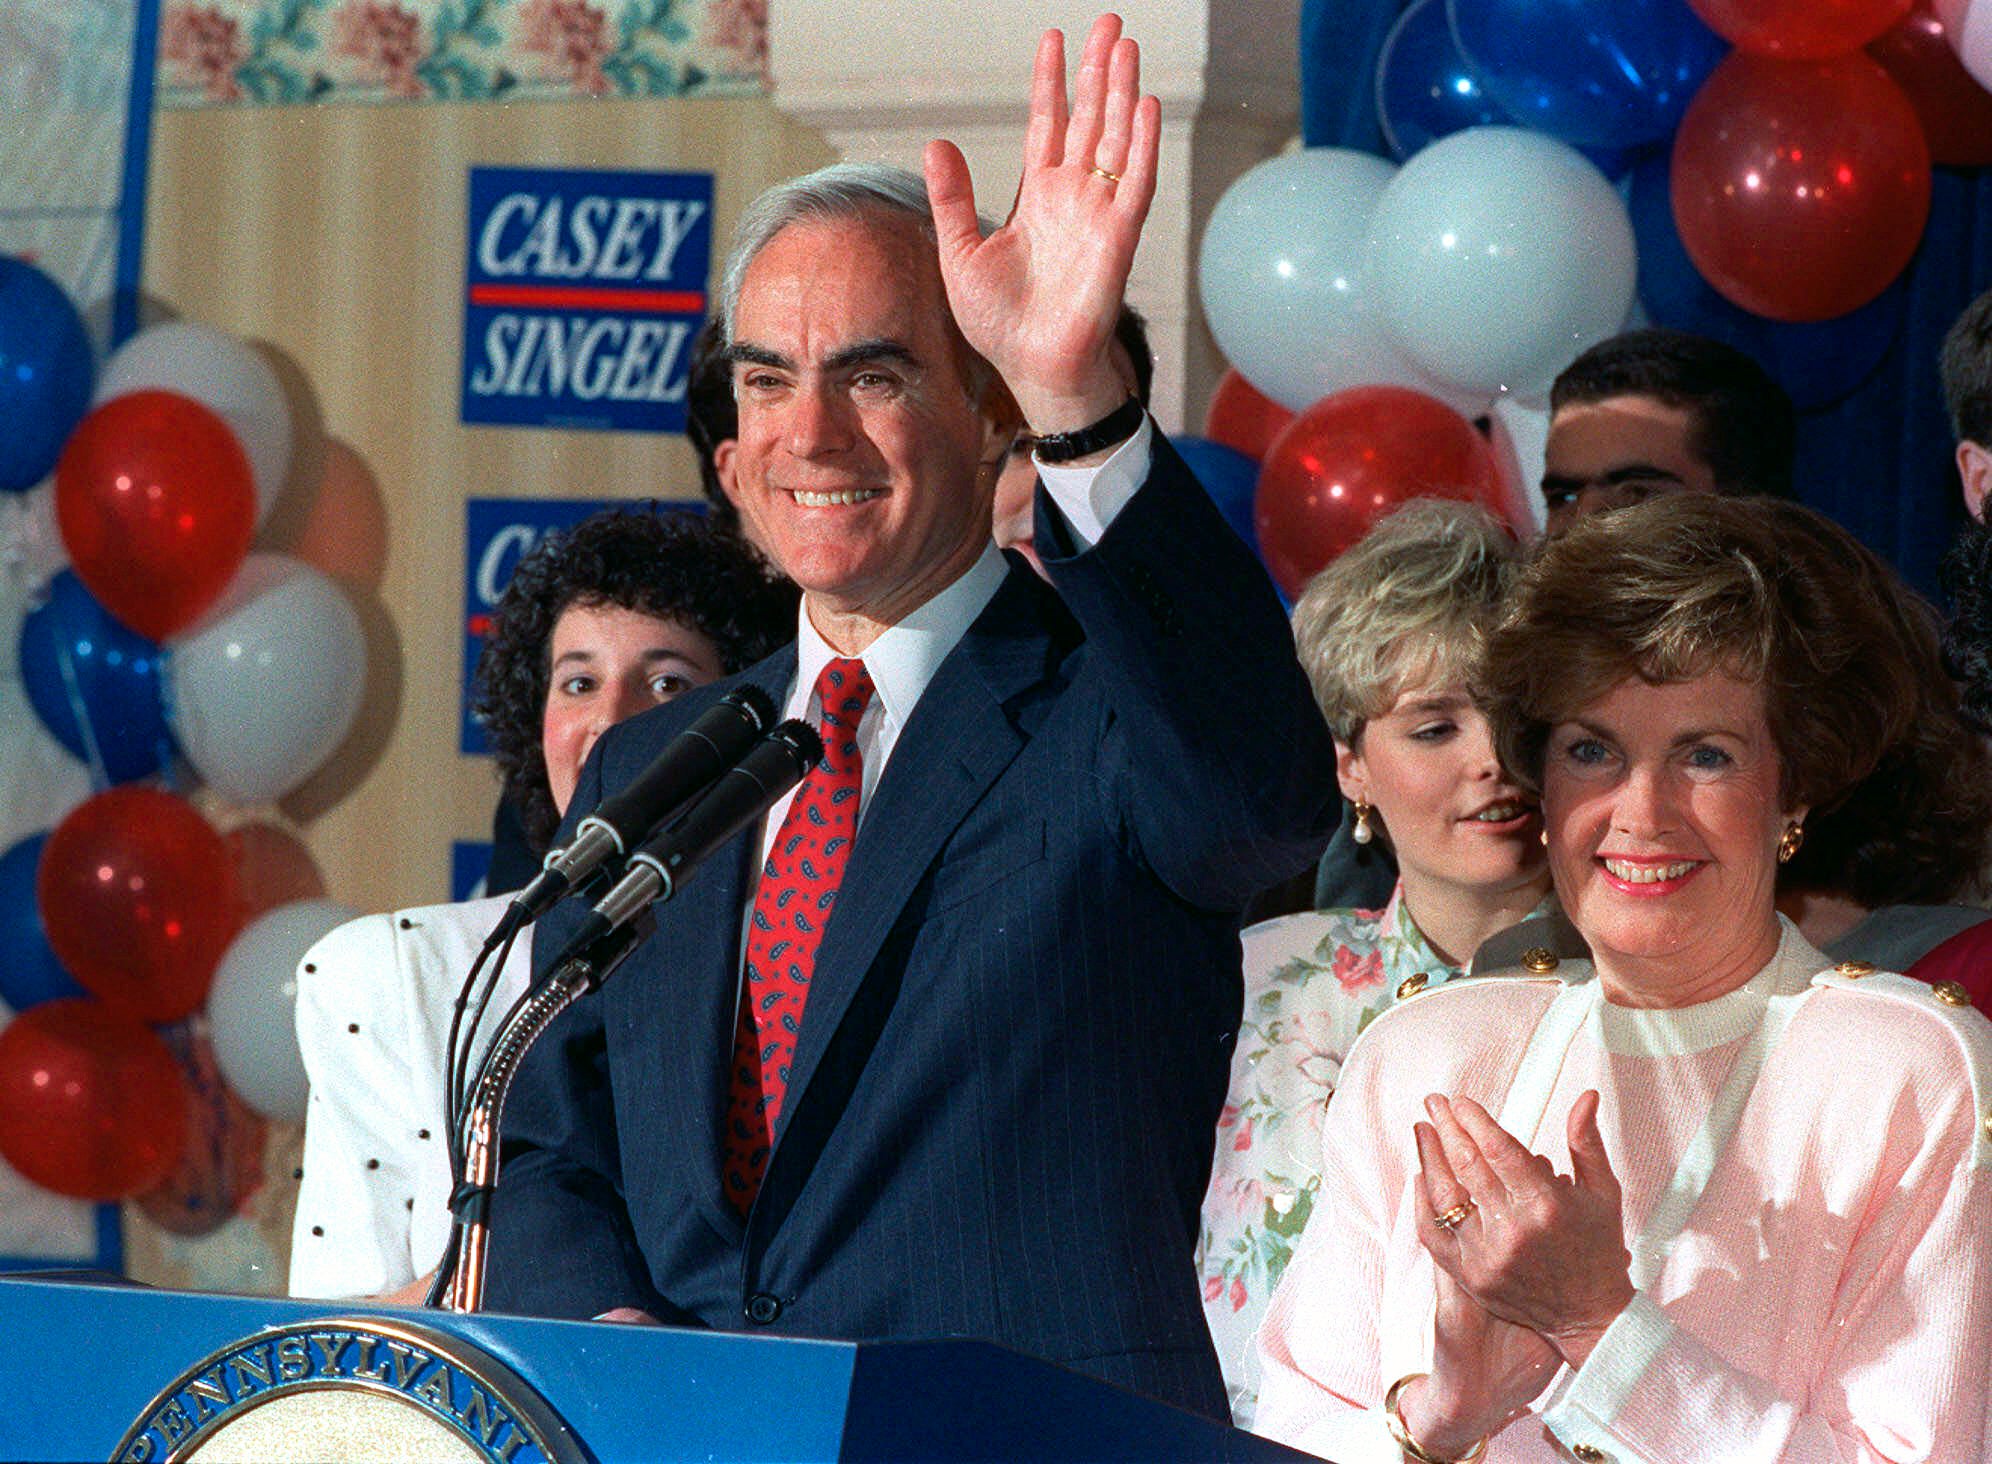 Planned Parenthood took on Pennsylvania Governor Robert Casey (pictured) to protect women’s reproductive rights in 1992